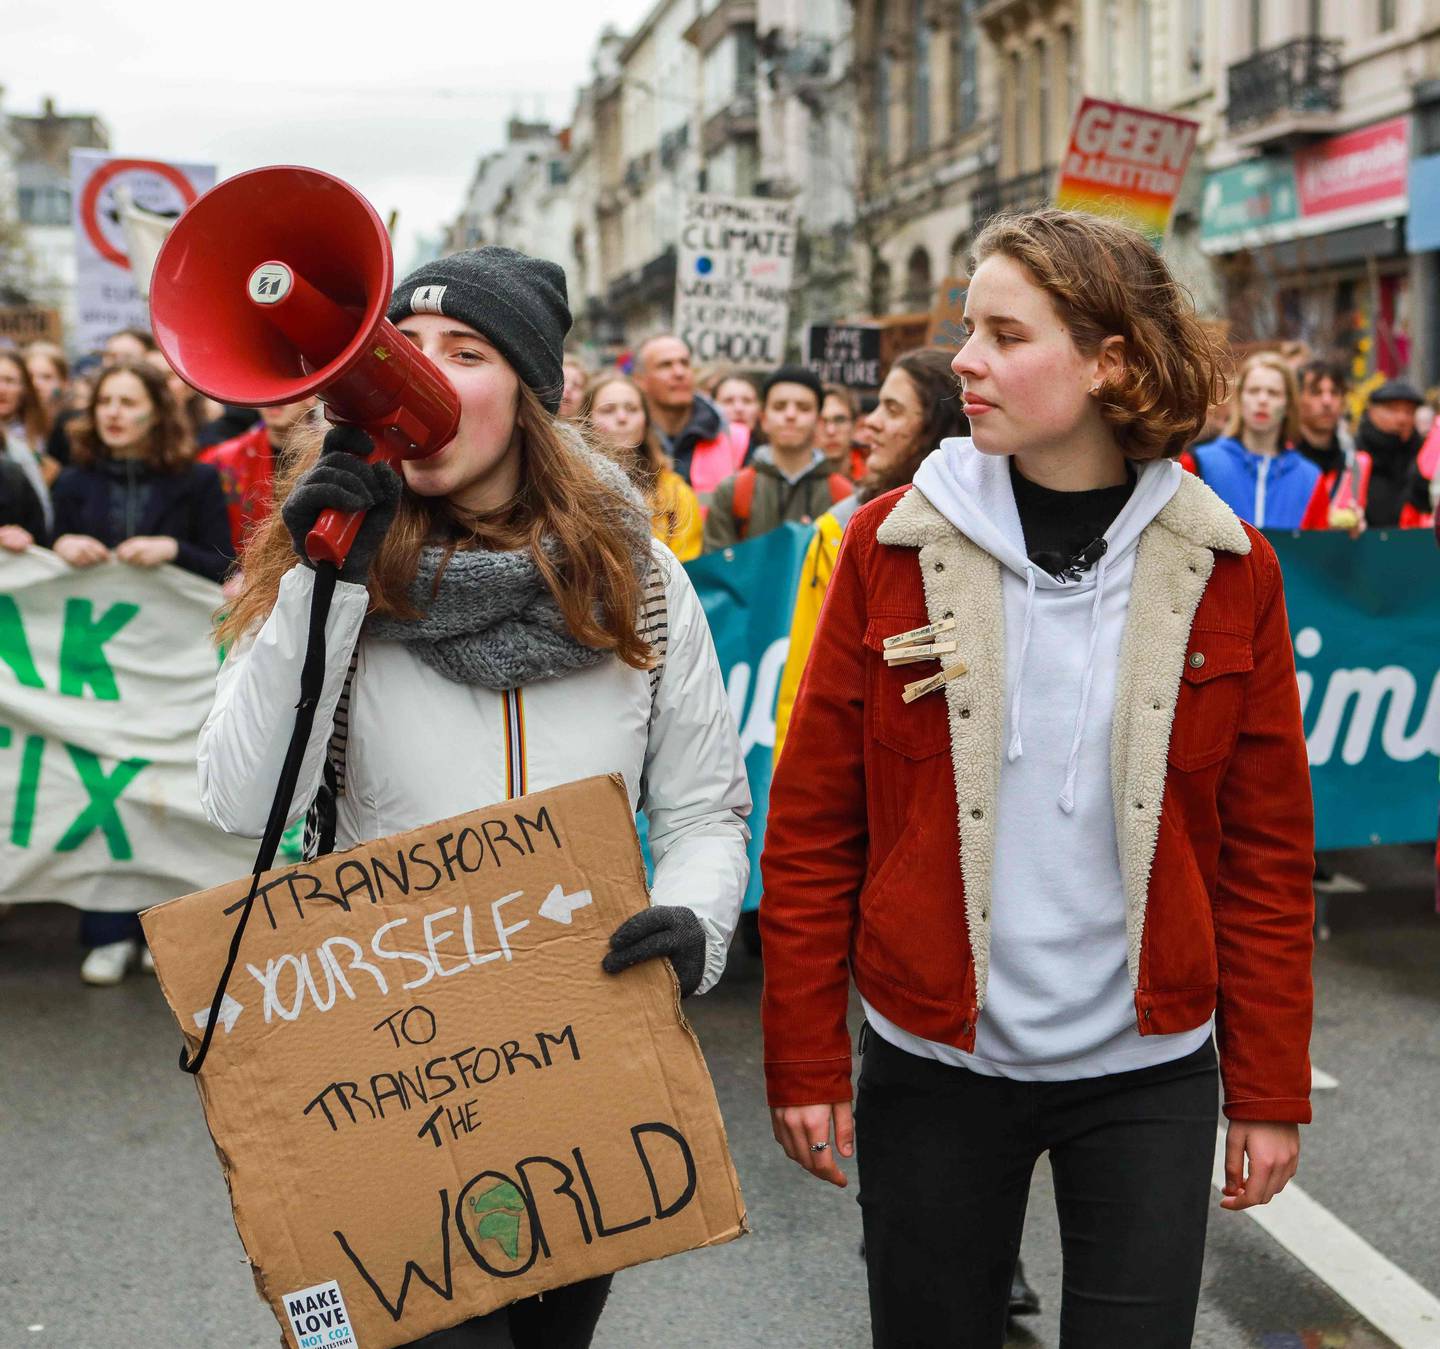 Climate activists Adelaide Charlier (L) and Climate activist Anuna De Wever take part in a demonstration as part of a global day of student protests aiming to push world leaders into action on climate change on March 15, 2019, in Brussels. - The worldwide youth protests were inspired by a Swedish teen activist who camped out in front of parliament in Stockholm last year to demand action from world leaders on global warming. (Photo by PAUL-HENRI VERLOOY / BELGA / AFP)